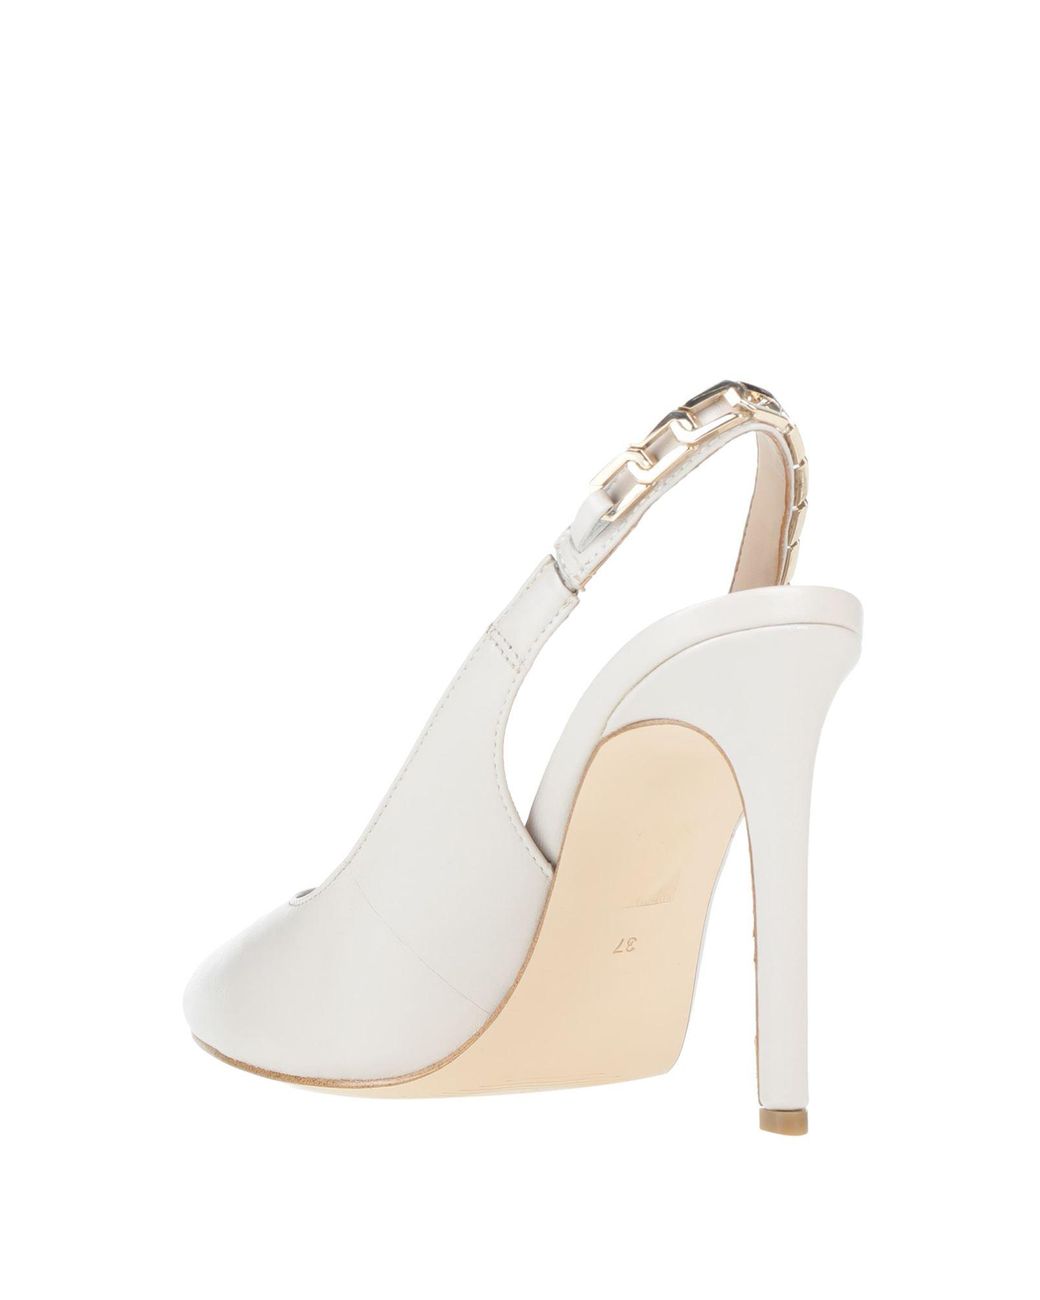 Guess Leather Pumps in Beige (Natural) - Lyst